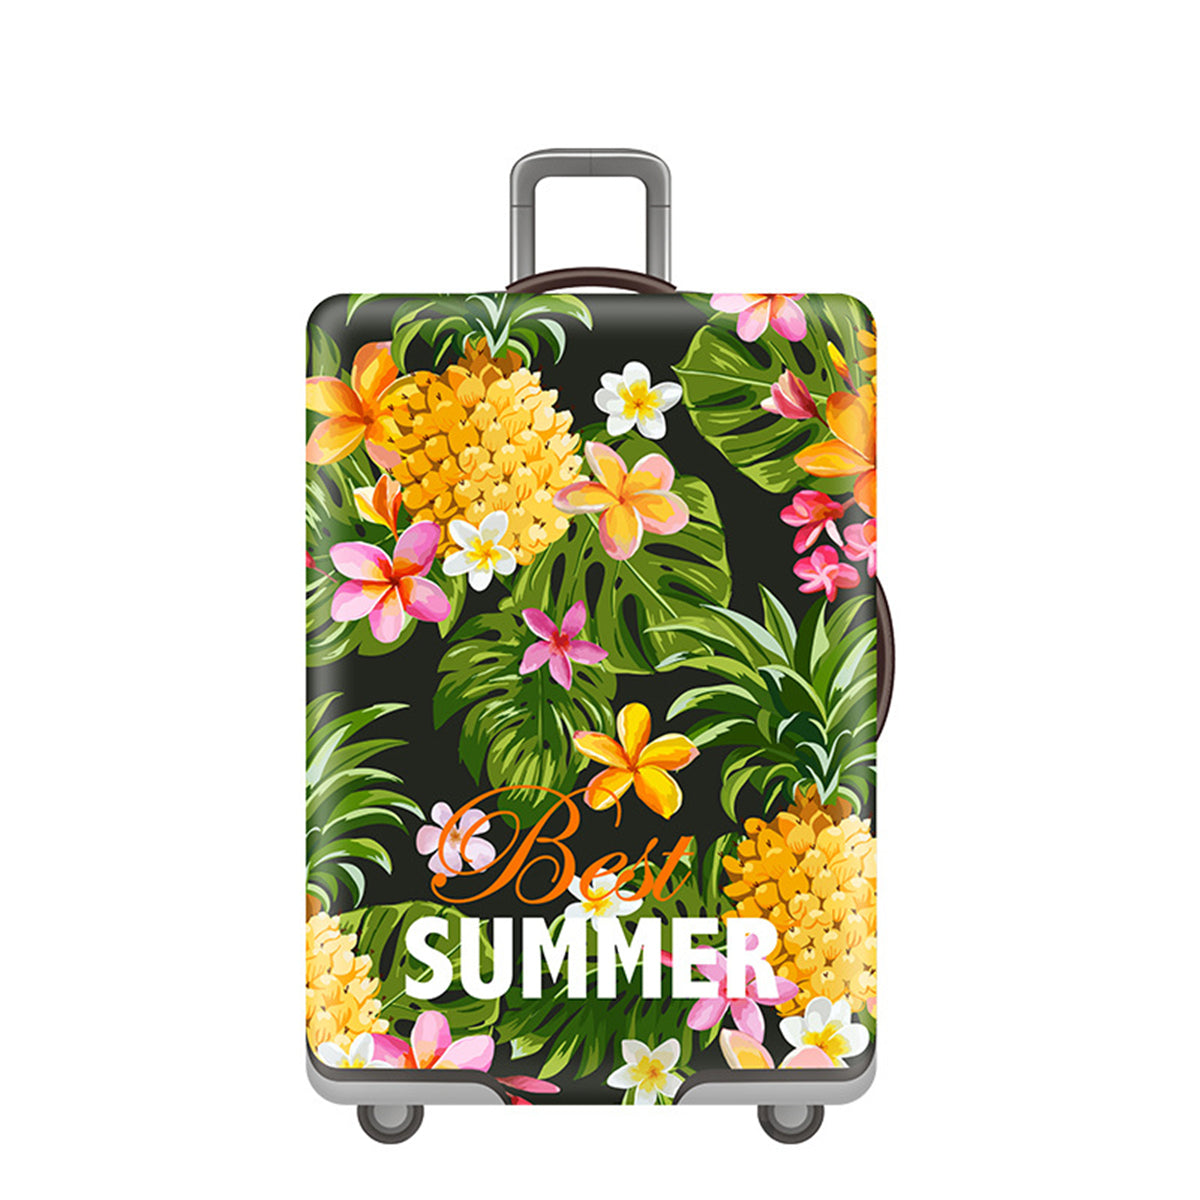 19-32 Inch Summer Hot Elastic Dustproof Travel Luggage Cover Suitcase Protective Sleeve